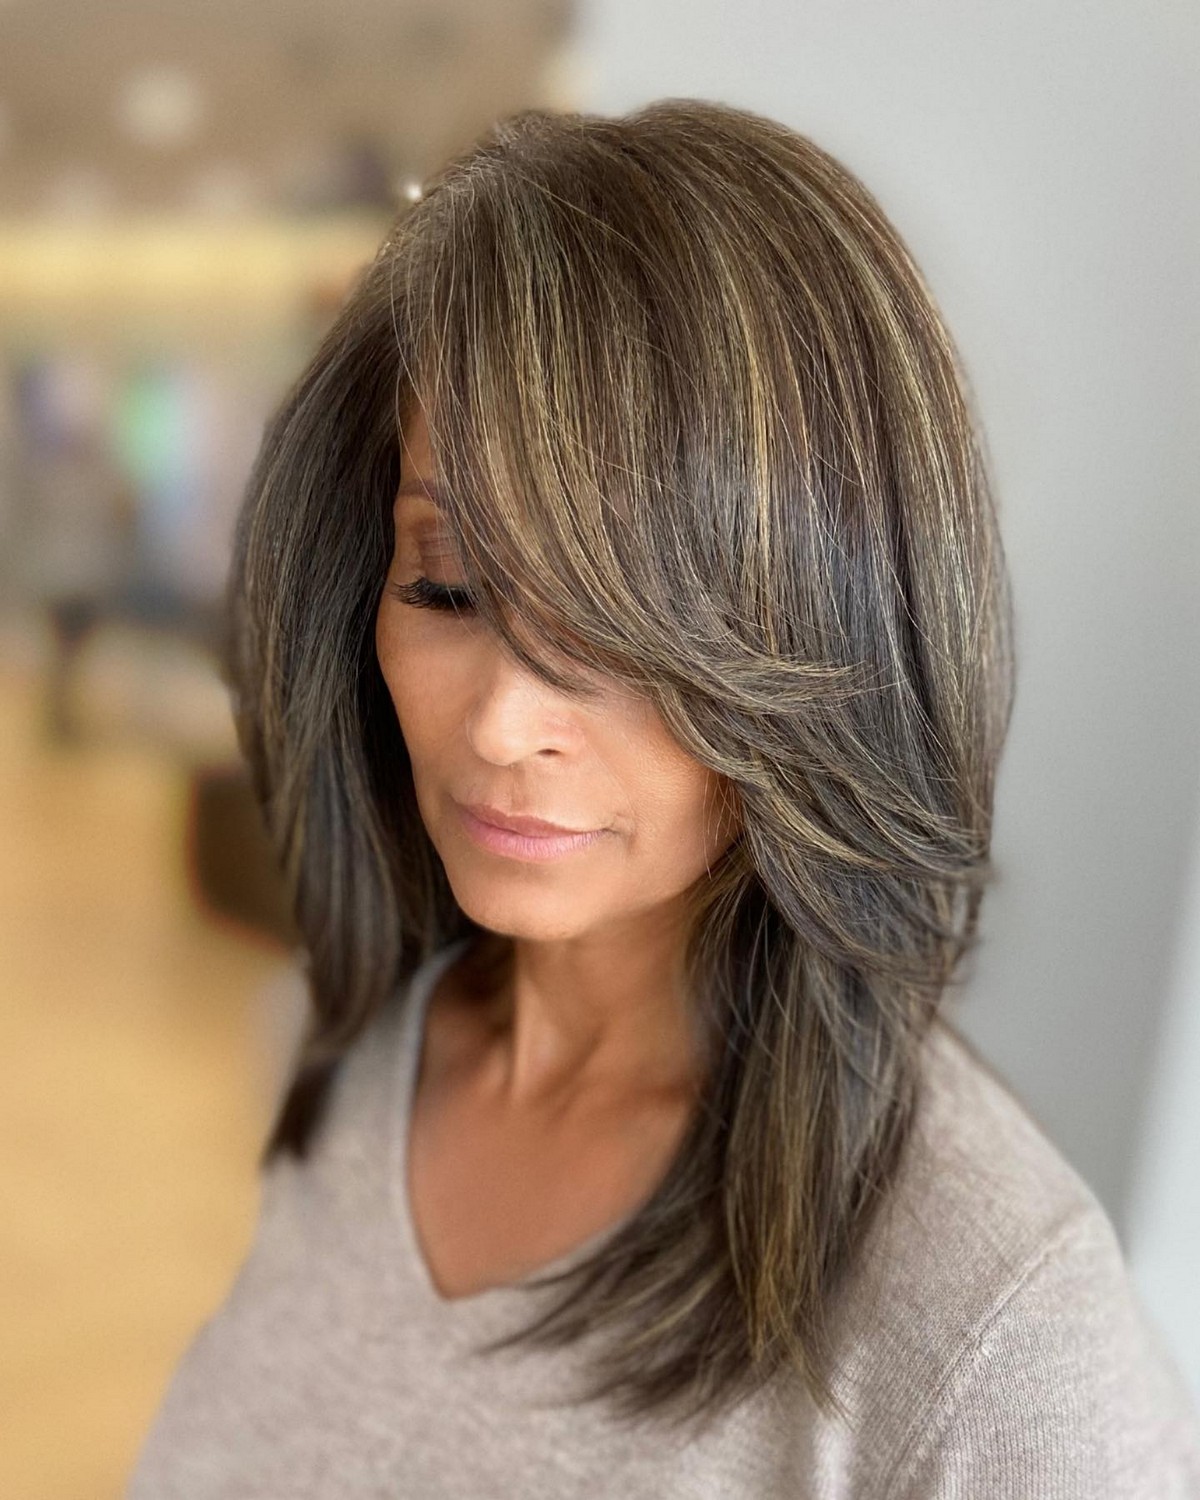 Feathered Side Bangs With Long Bob Hair